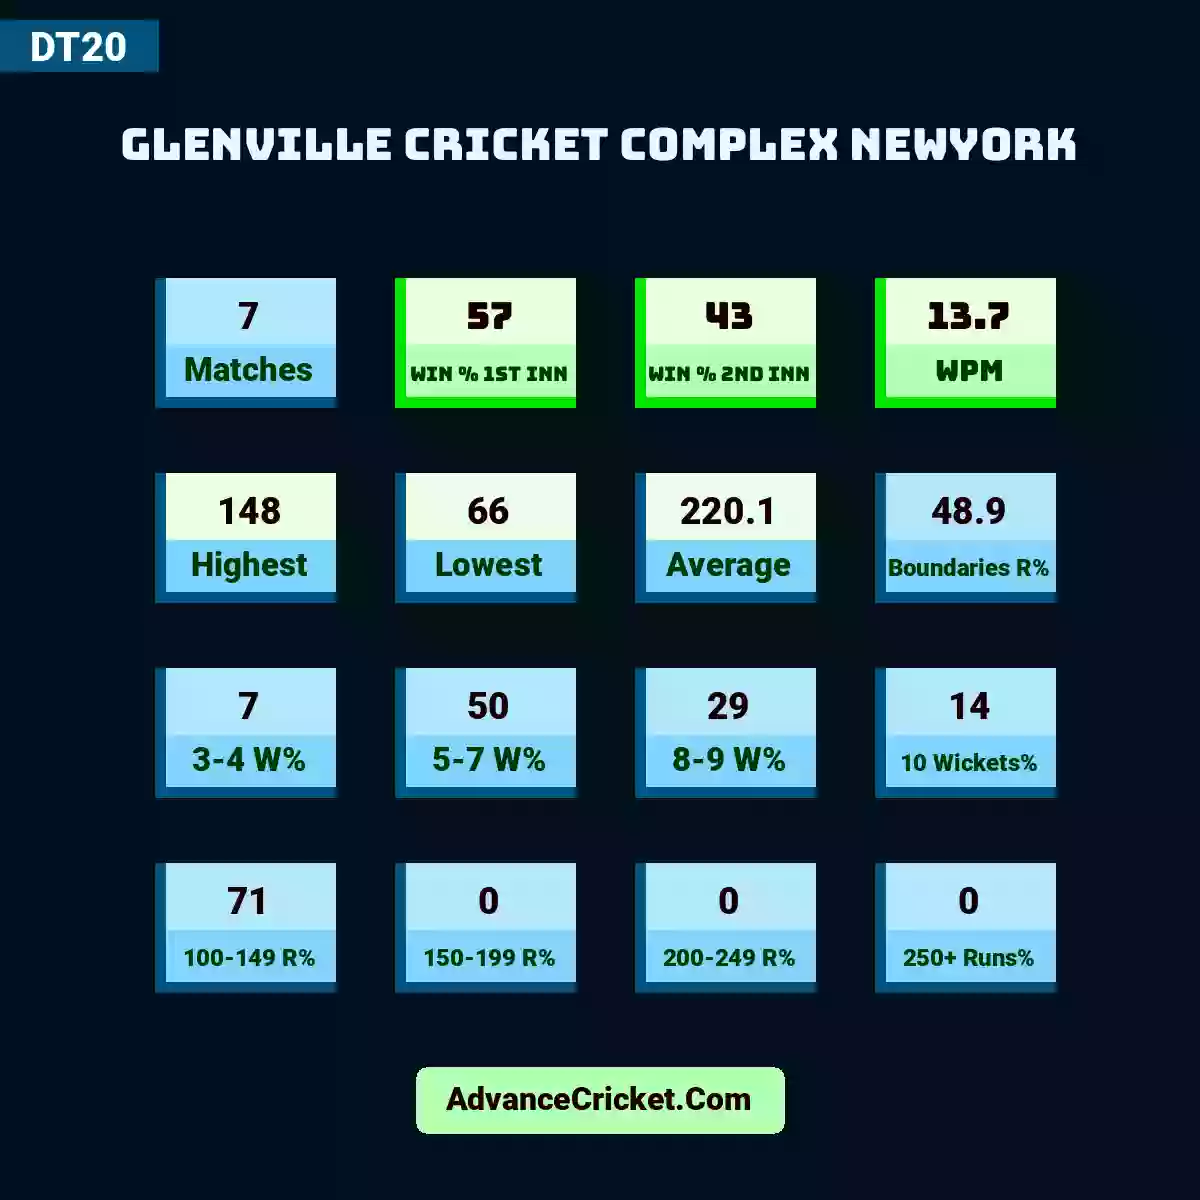 Image showing Glenville cricket complex Newyork with Matches: 7, Win % 1st Inn: 57, Win % 2nd Inn: 43, WPM: 13.7, Highest: 148, Lowest: 66, Average: 220.1, Boundaries R%: 48.9, 3-4 W%: 7, 5-7 W%: 50, 8-9 W%: 29, 10 Wickets%: 14, 100-149 R%: 71, 150-199 R%: 0, 200-249 R%: 0, 250+ Runs%: 0.